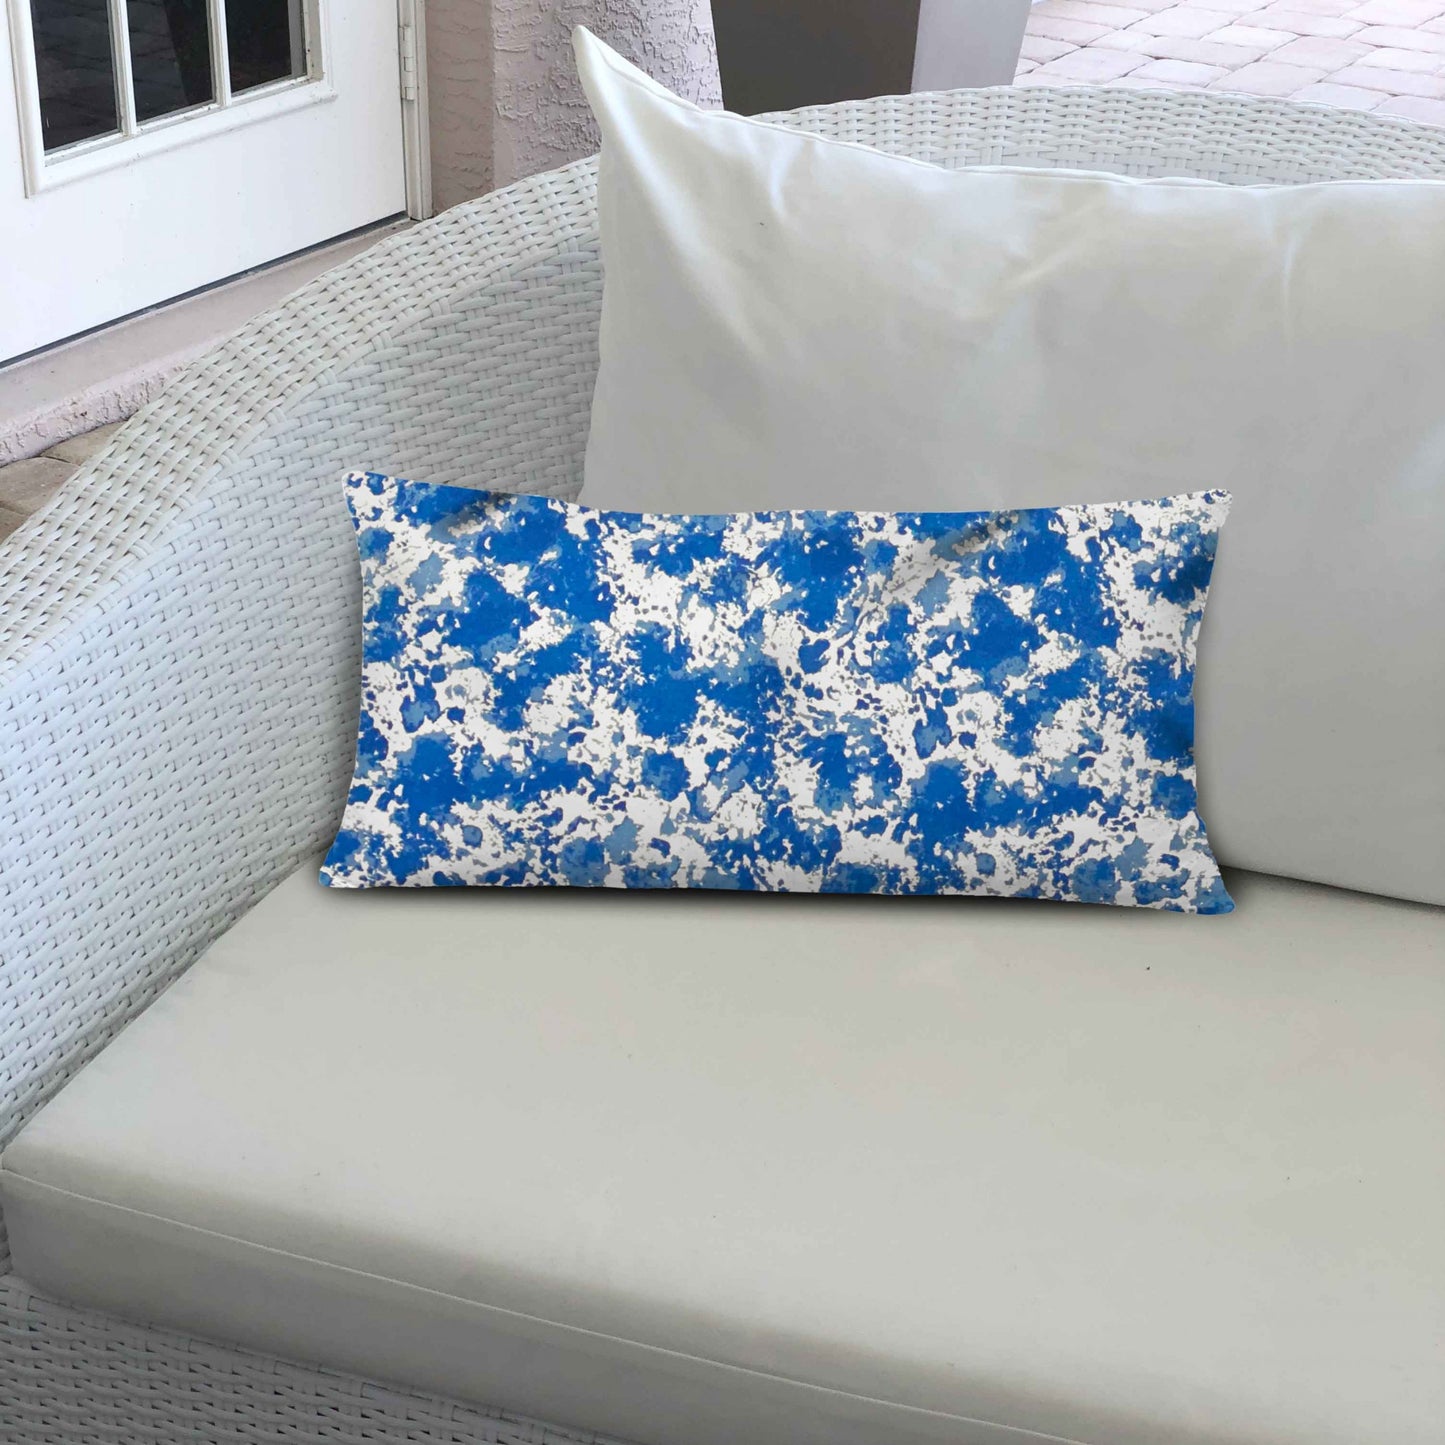 16" X 26" Blue And White Enveloped Coastal Lumbar Indoor Outdoor Pillow Cover